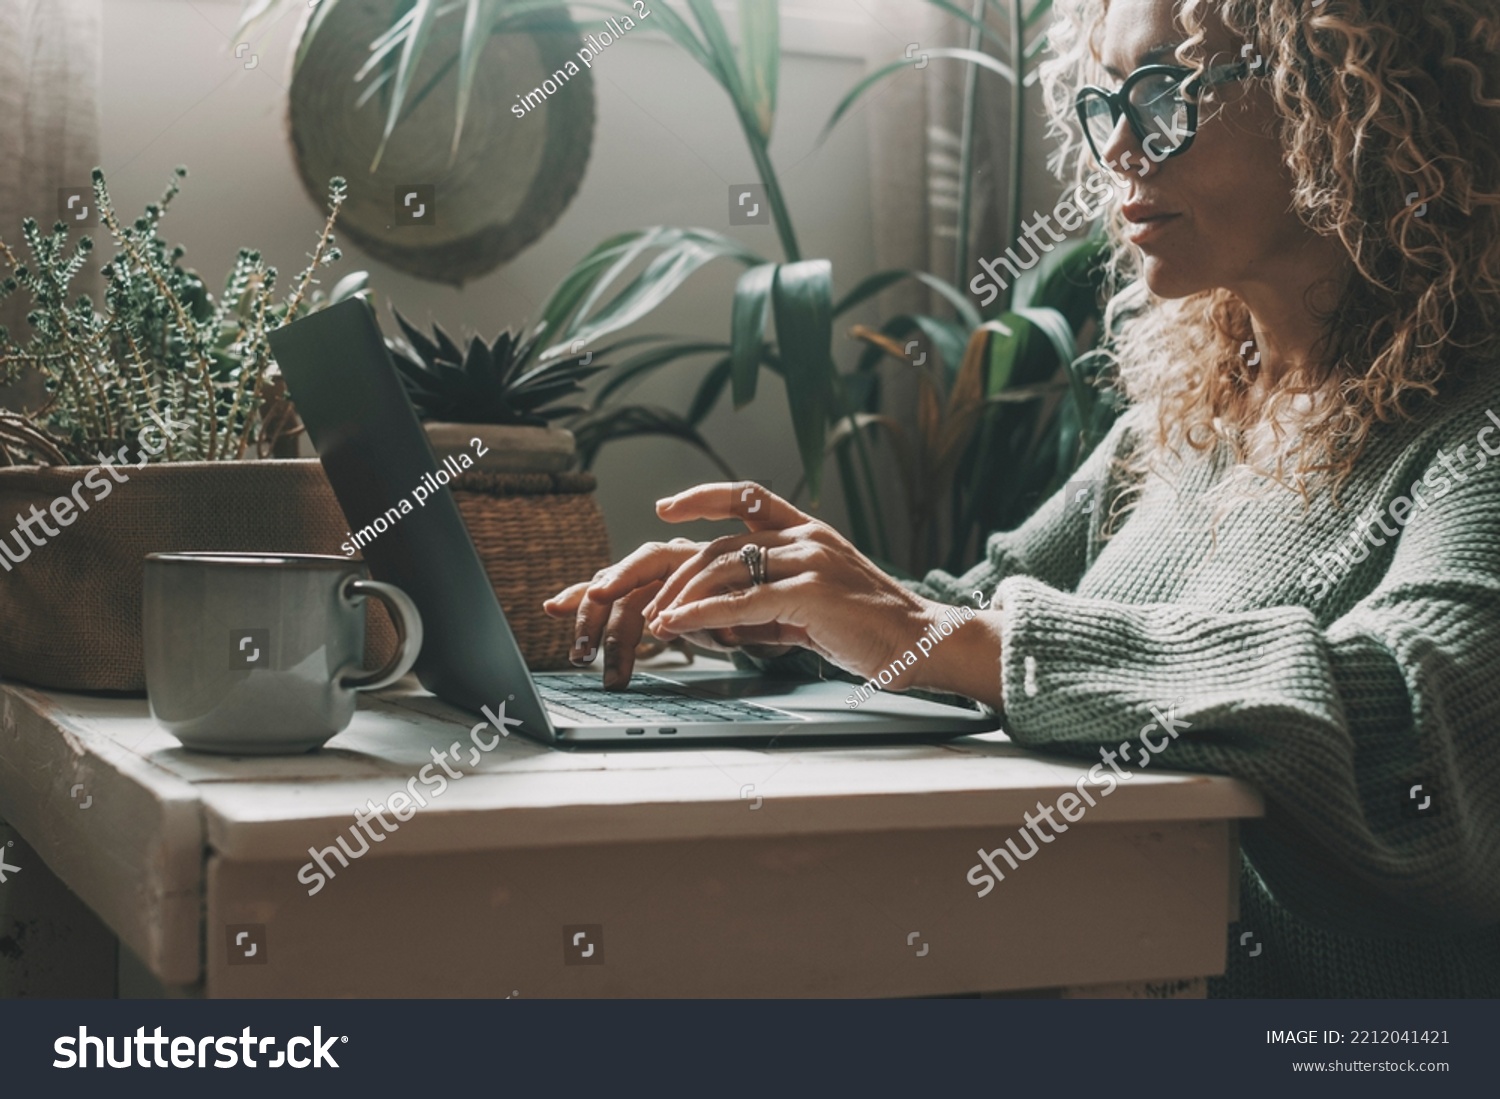 Professional woman working at home on laptop writing with concentrated expression. Modern female people using computer in indoor online leisure activity. Shopping or business smart work job freelance #2212041421